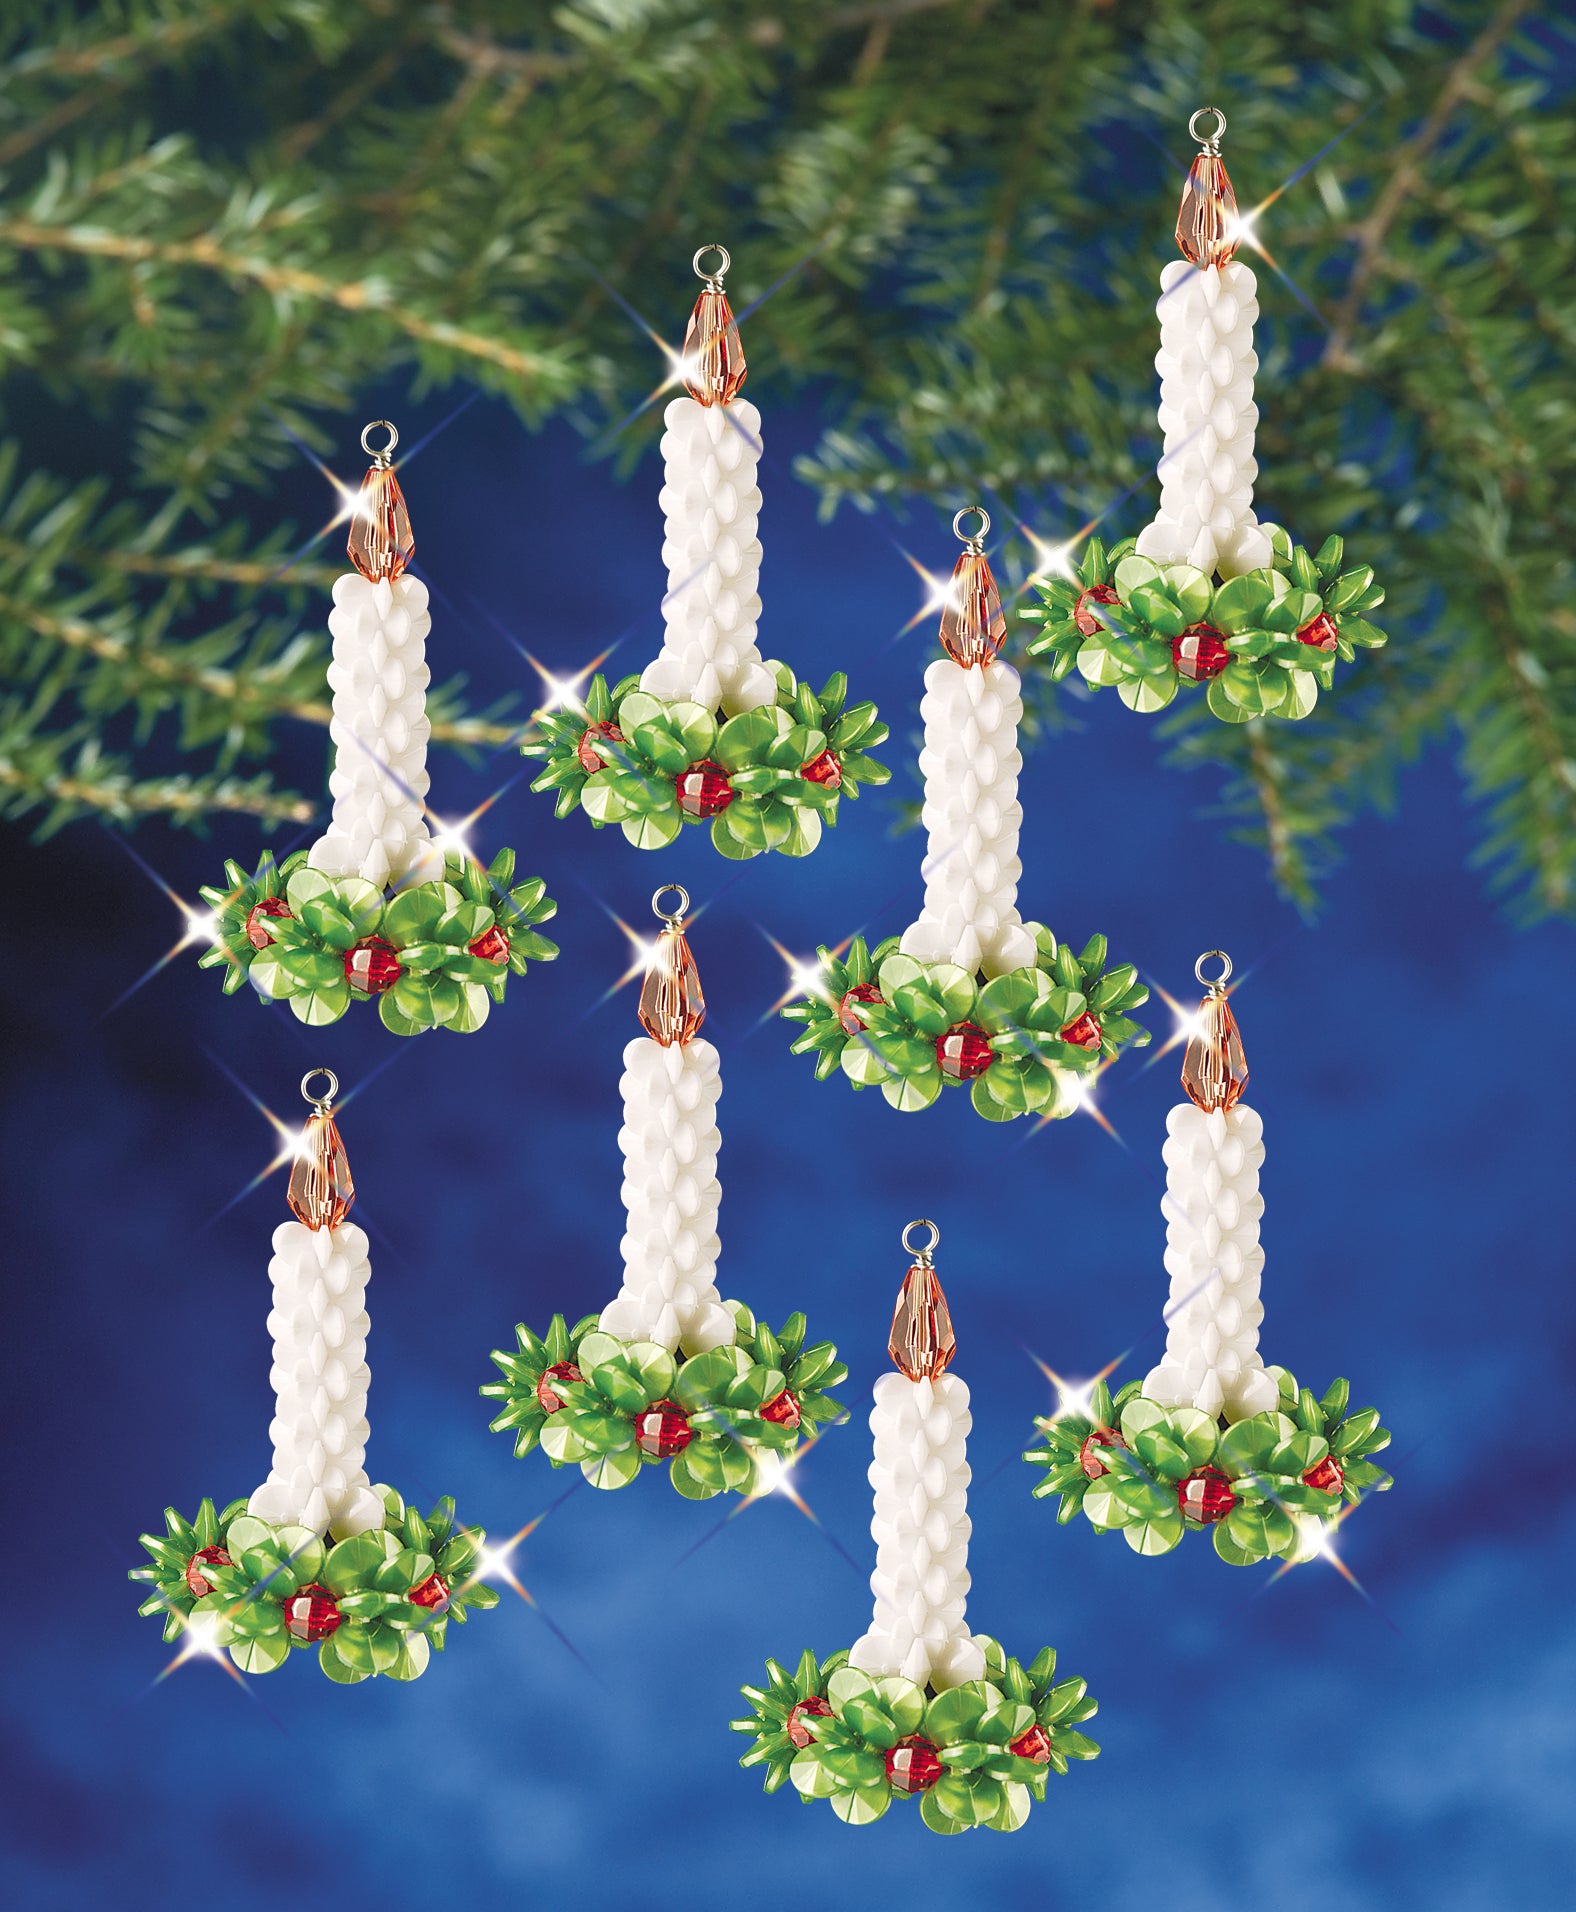 Beadery Holiday Ornament Kit Candle Wreath #7464 - Beadery Products